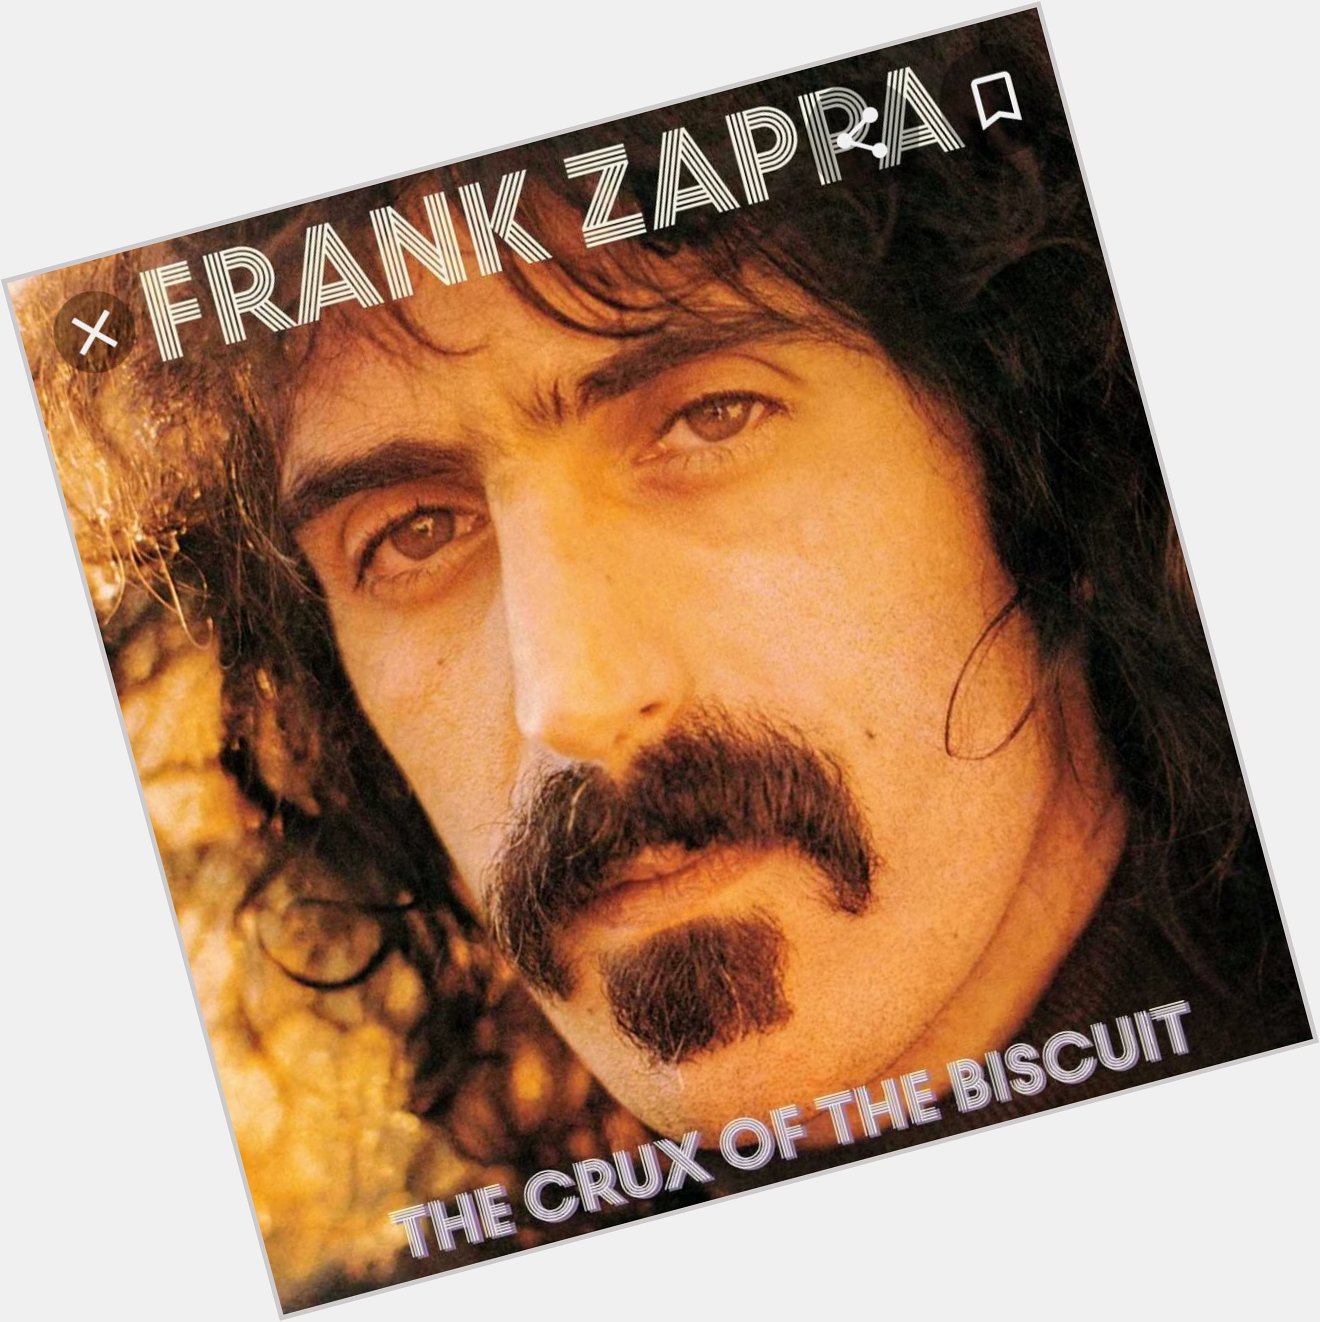 Happy 80th Birthday Frank Zappa, I hope you found The Crux of the Biscuit. RIP my talented friend 